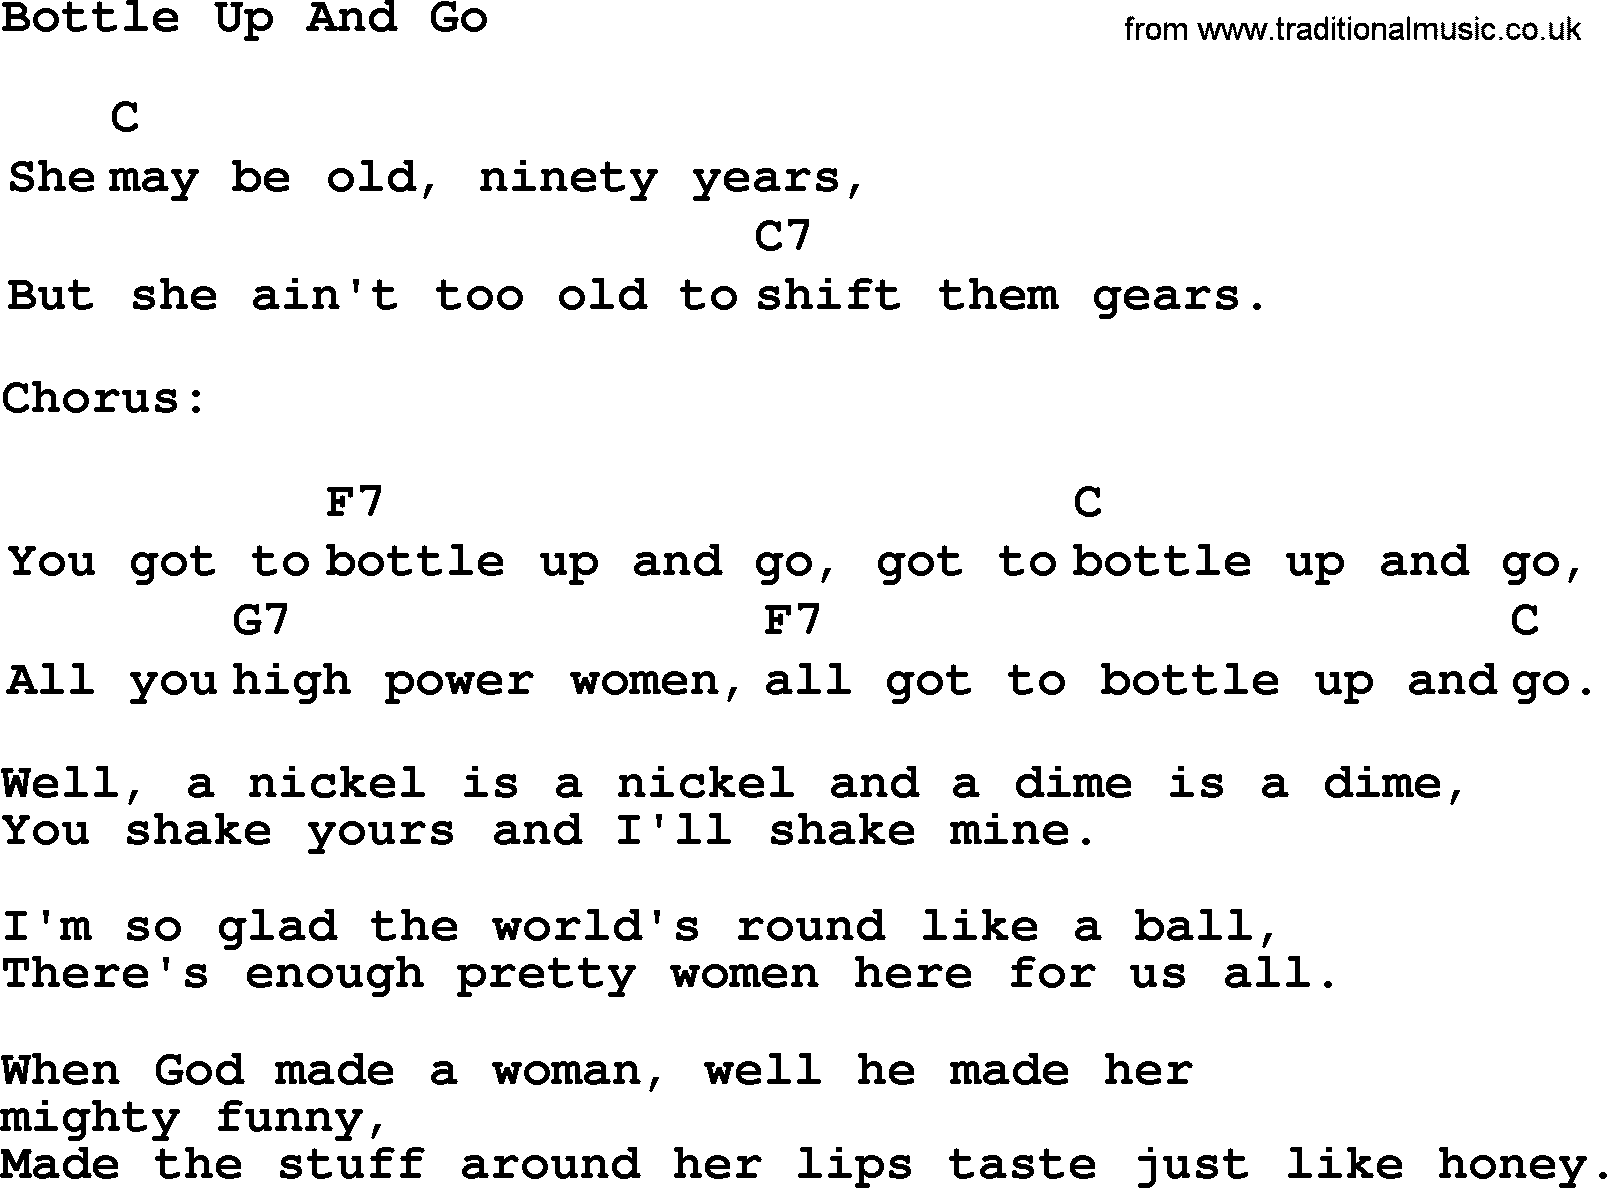 Top 1000 Most Popular Folk and Old-time Songs: Bottle Up And Go, lyrics and chords